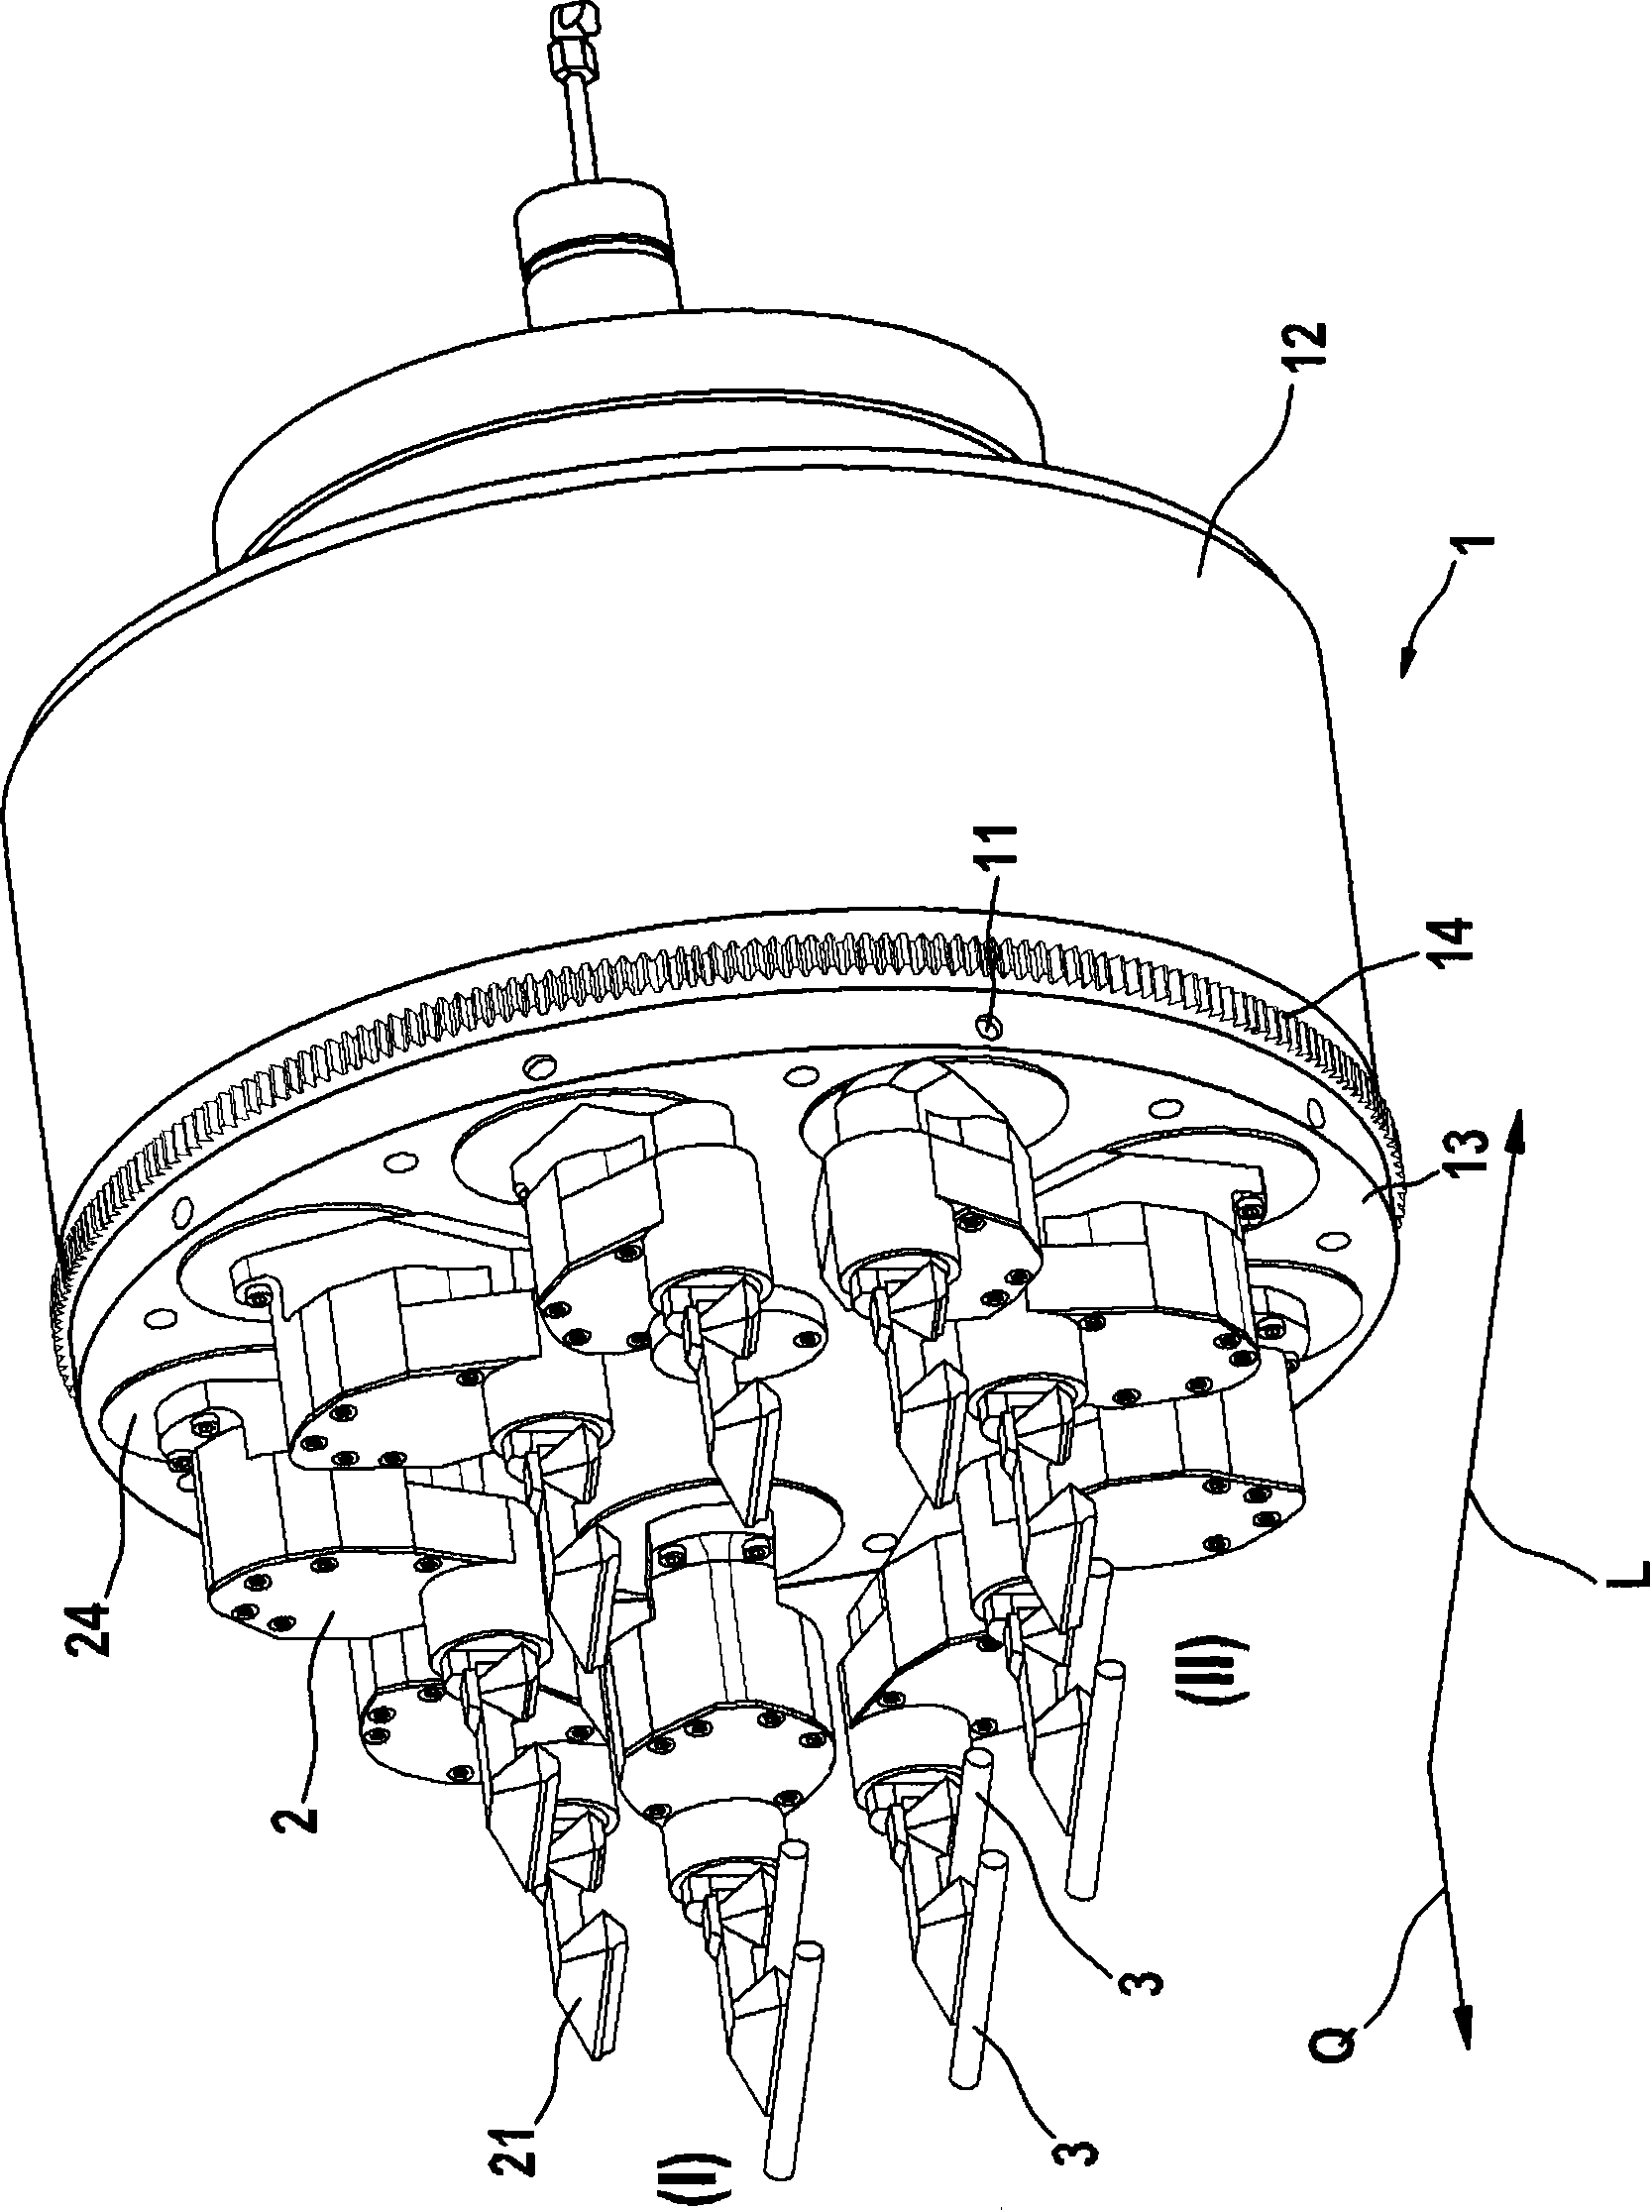 Conveyor device with negative pressure suction